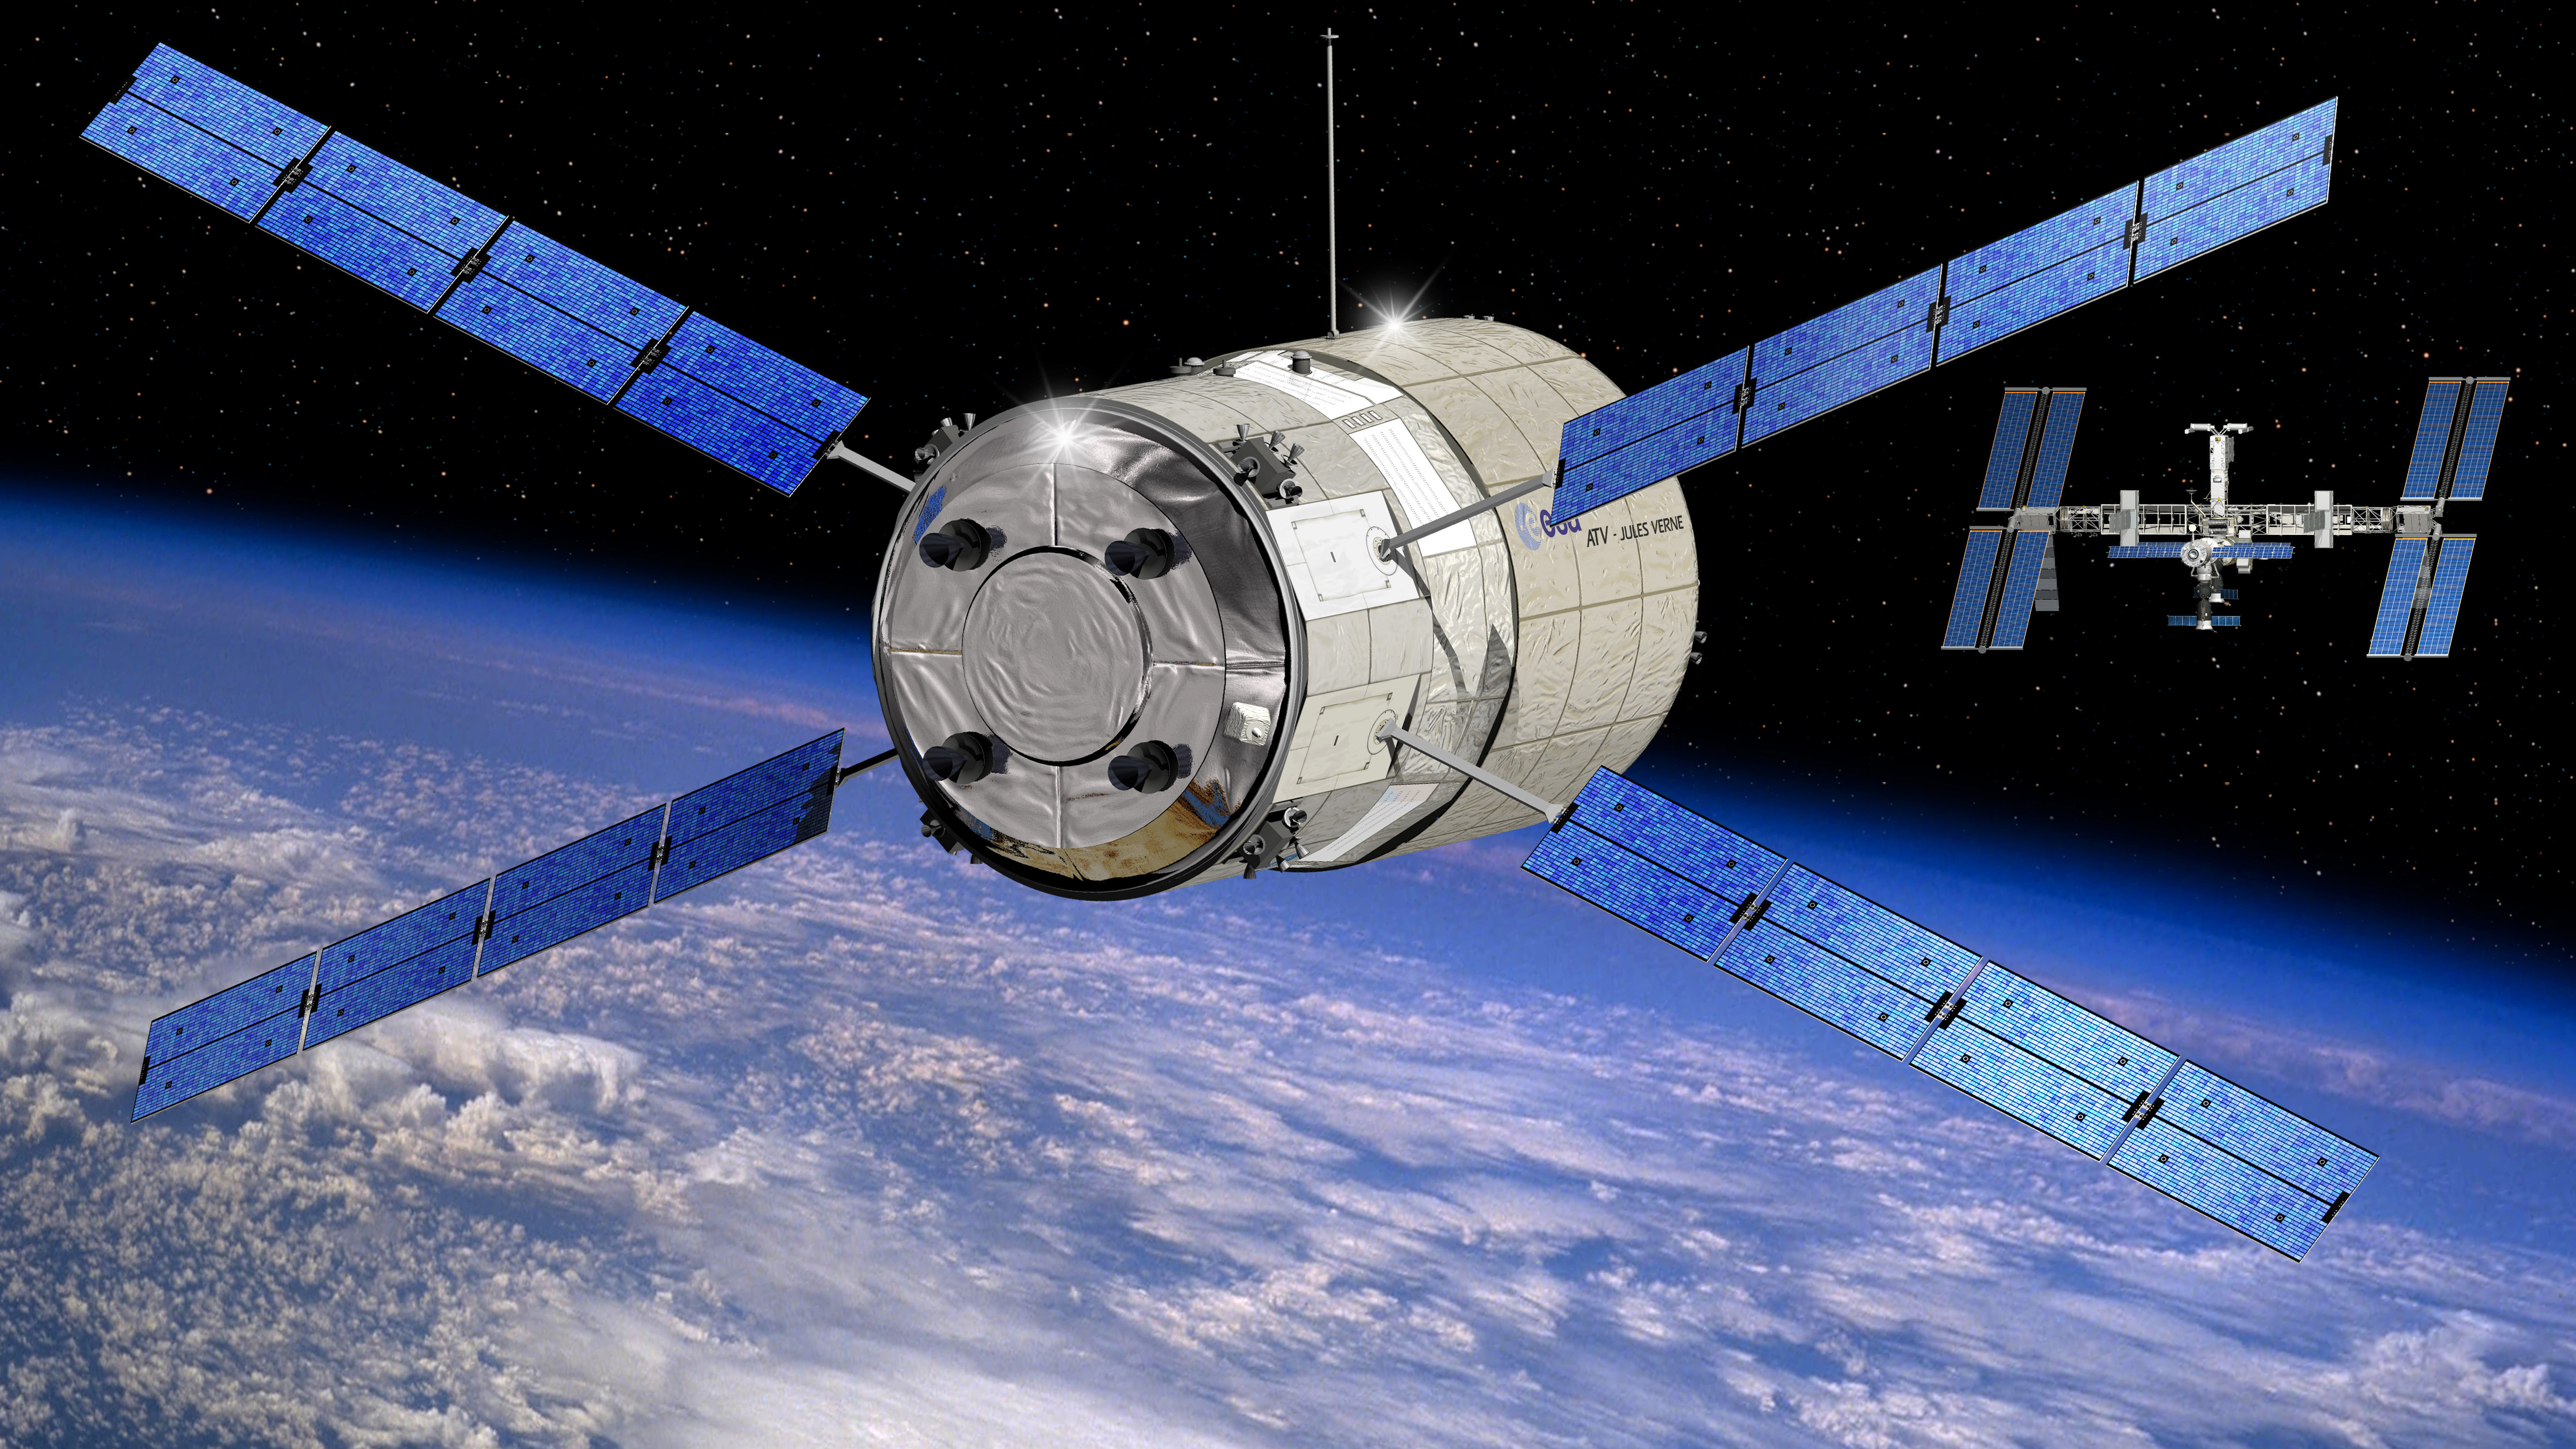 ATV - Automatic docking in space - DLR Portal